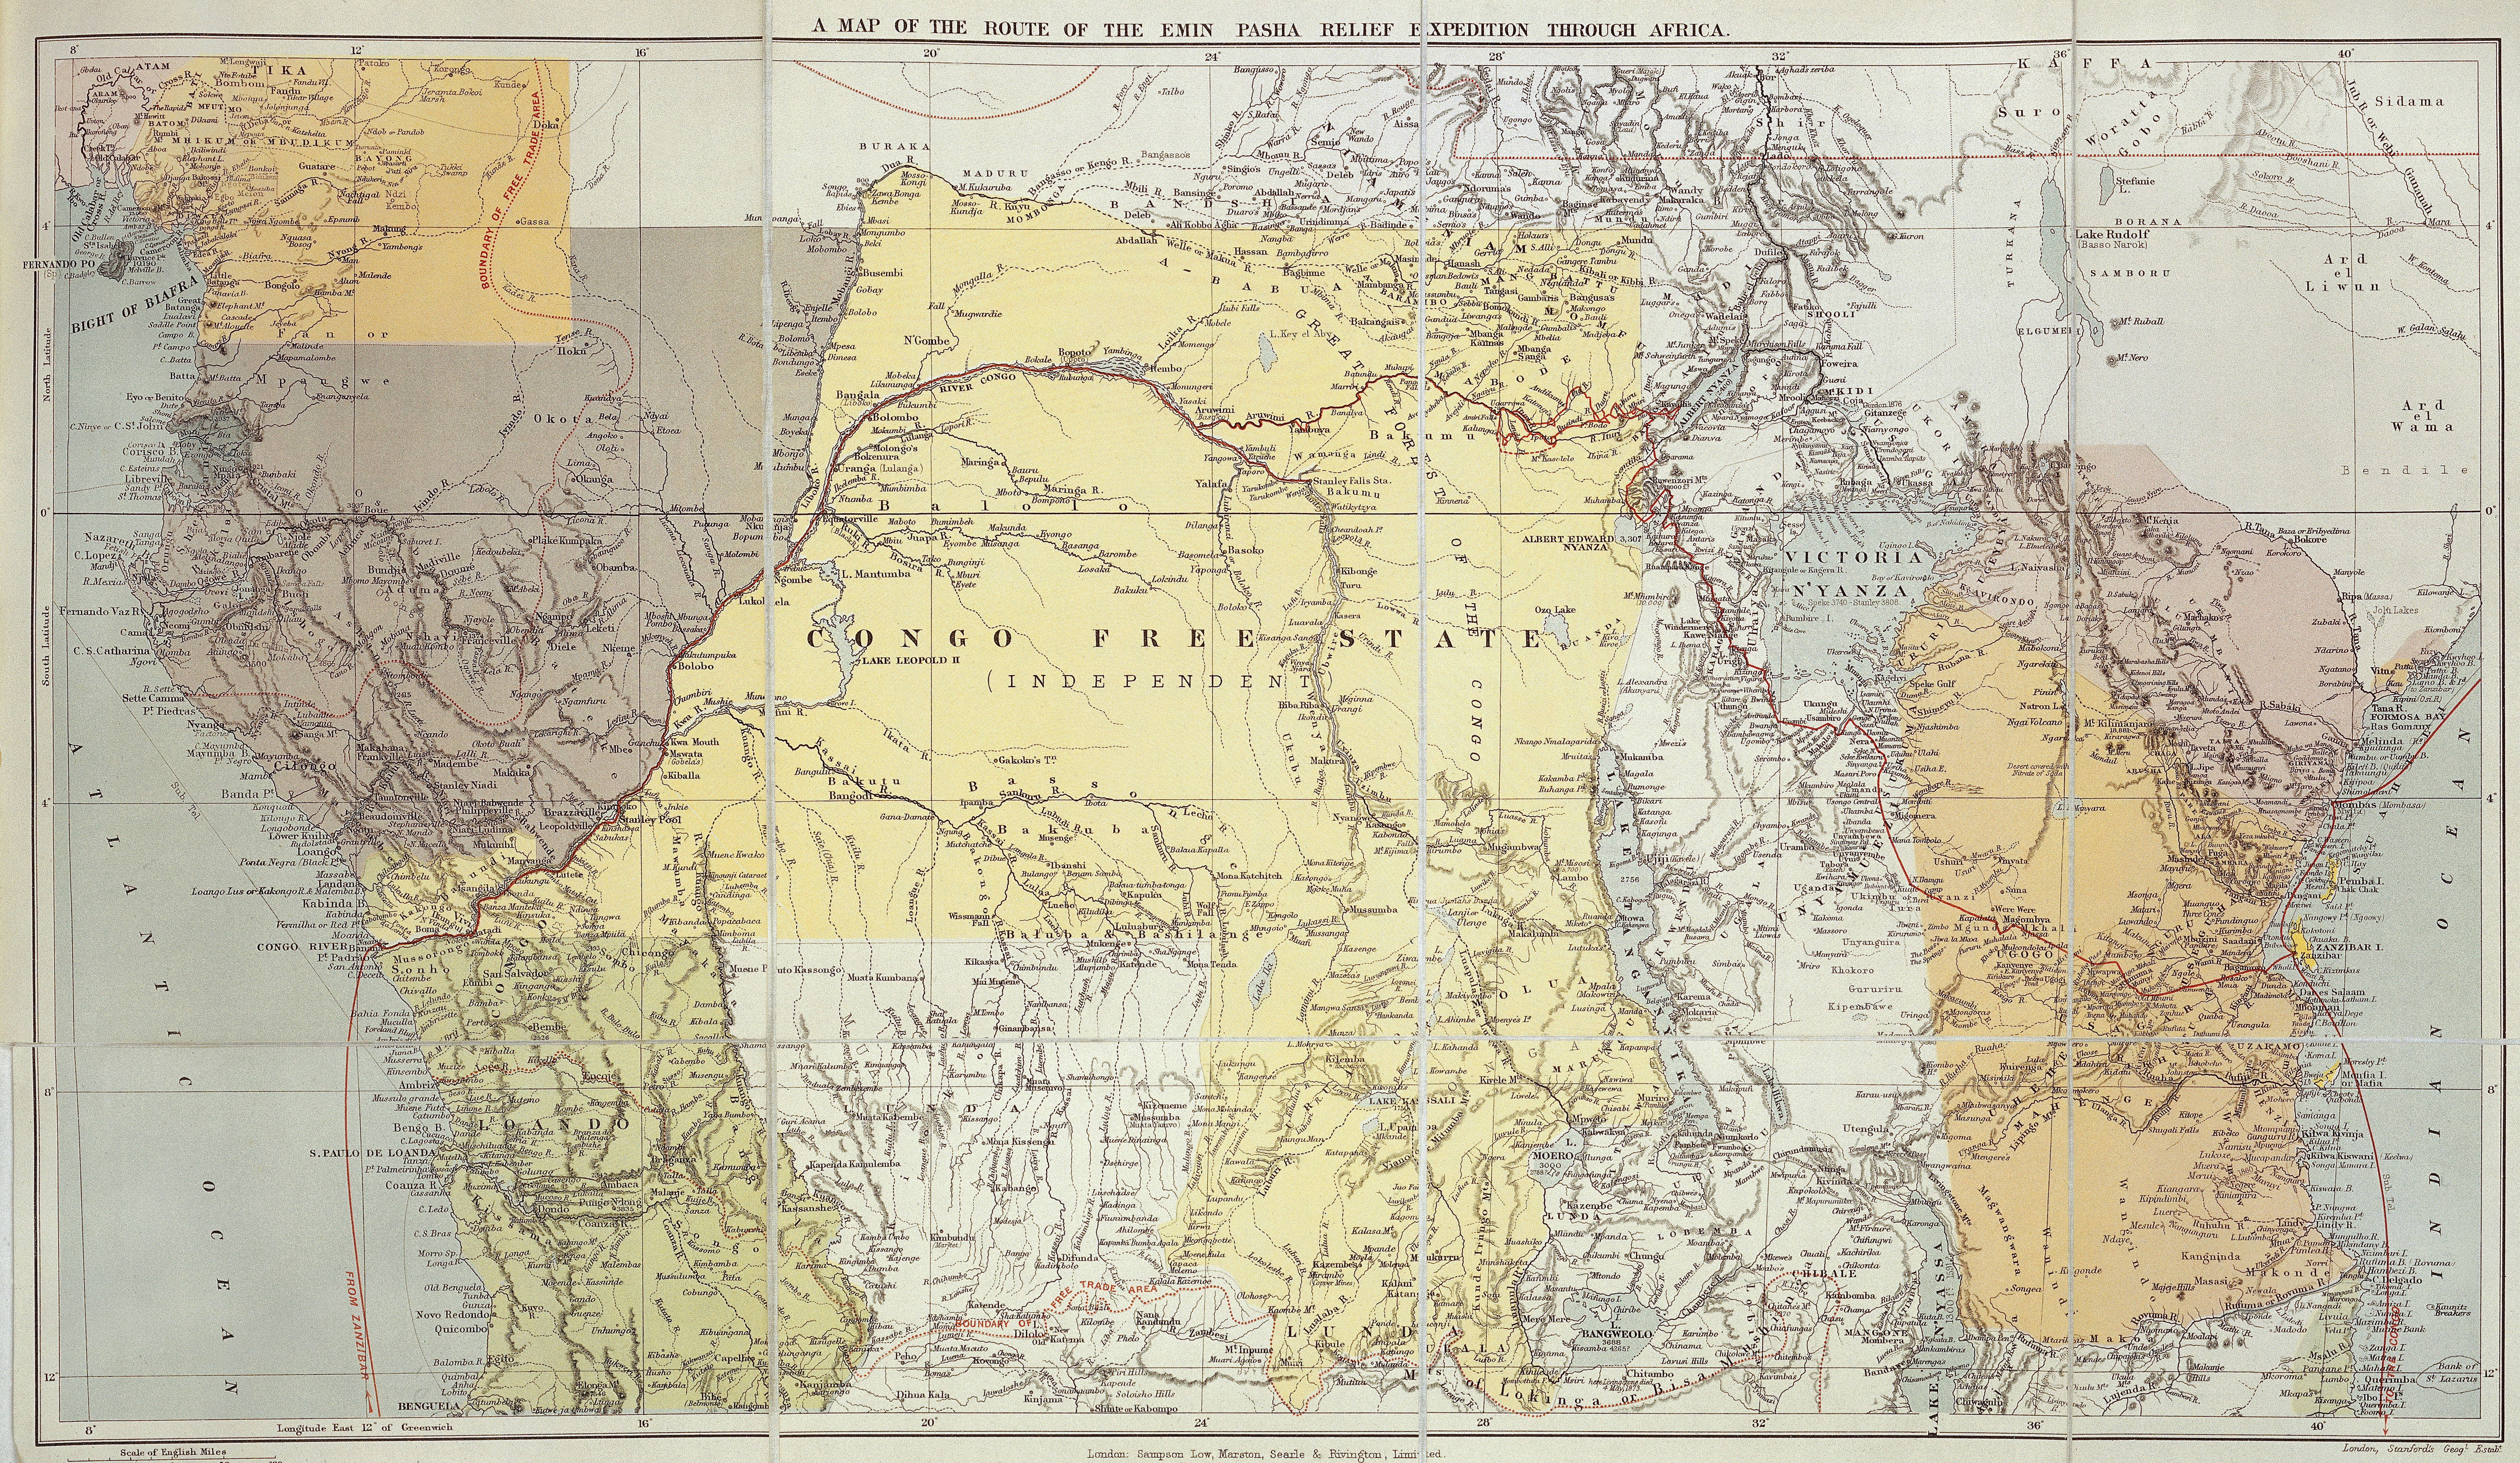 19th century map of central Africa labeled 'a map of the route of the emin pasha relief expidition through Africa'. Prominent in the map is 'Congo Free State (independent)'